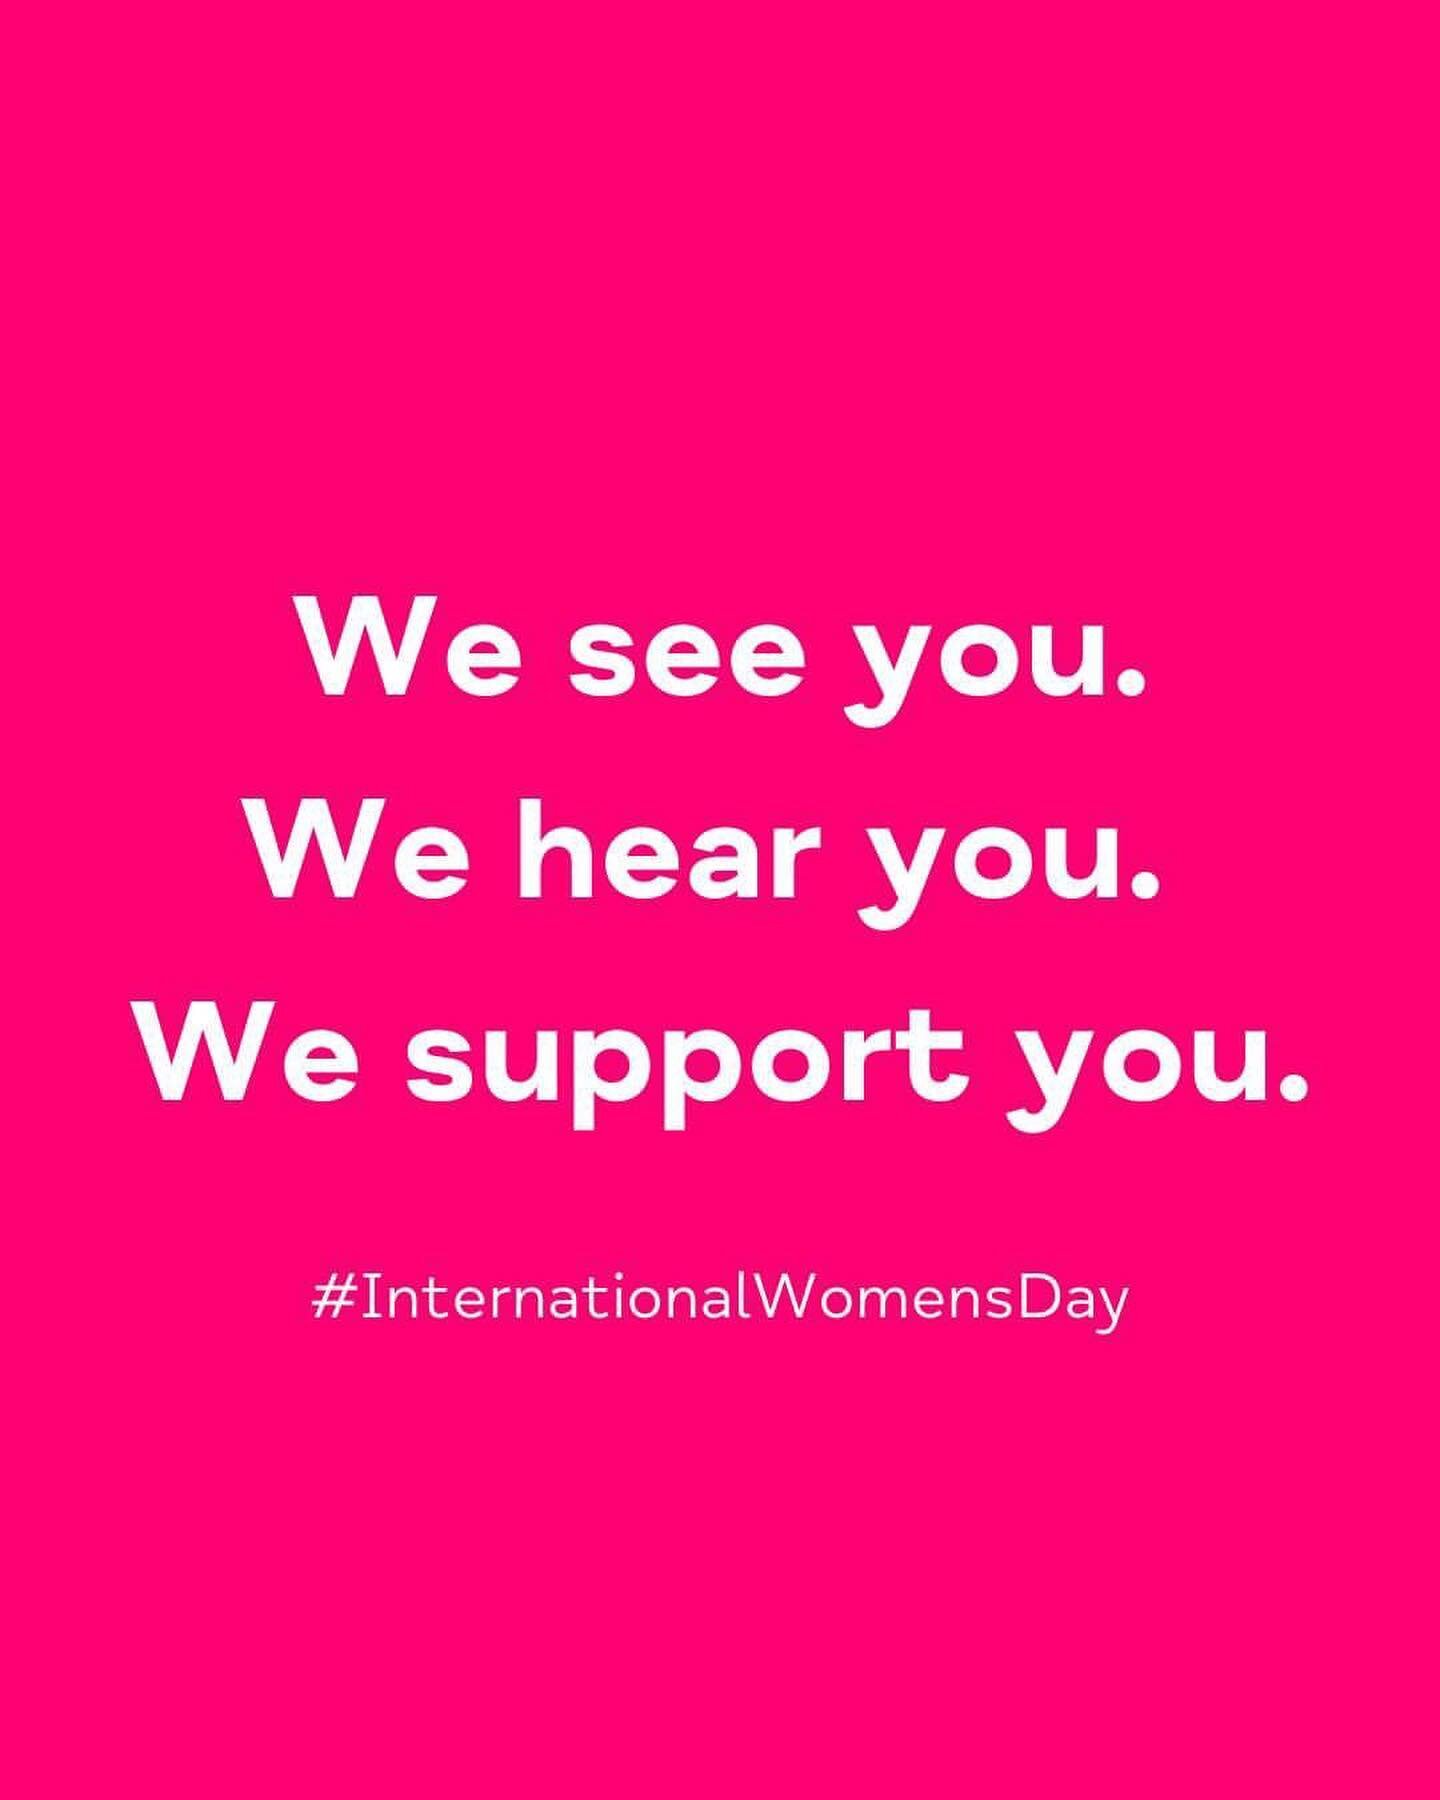 This #InternationalWomensDay we&rsquo;re celebrating all women. We&rsquo;d be lying if we said the last few years had been kind to women, so let's take today to appreciate the steps women have taken, and recognise the fight we still have ahead ✊

We 